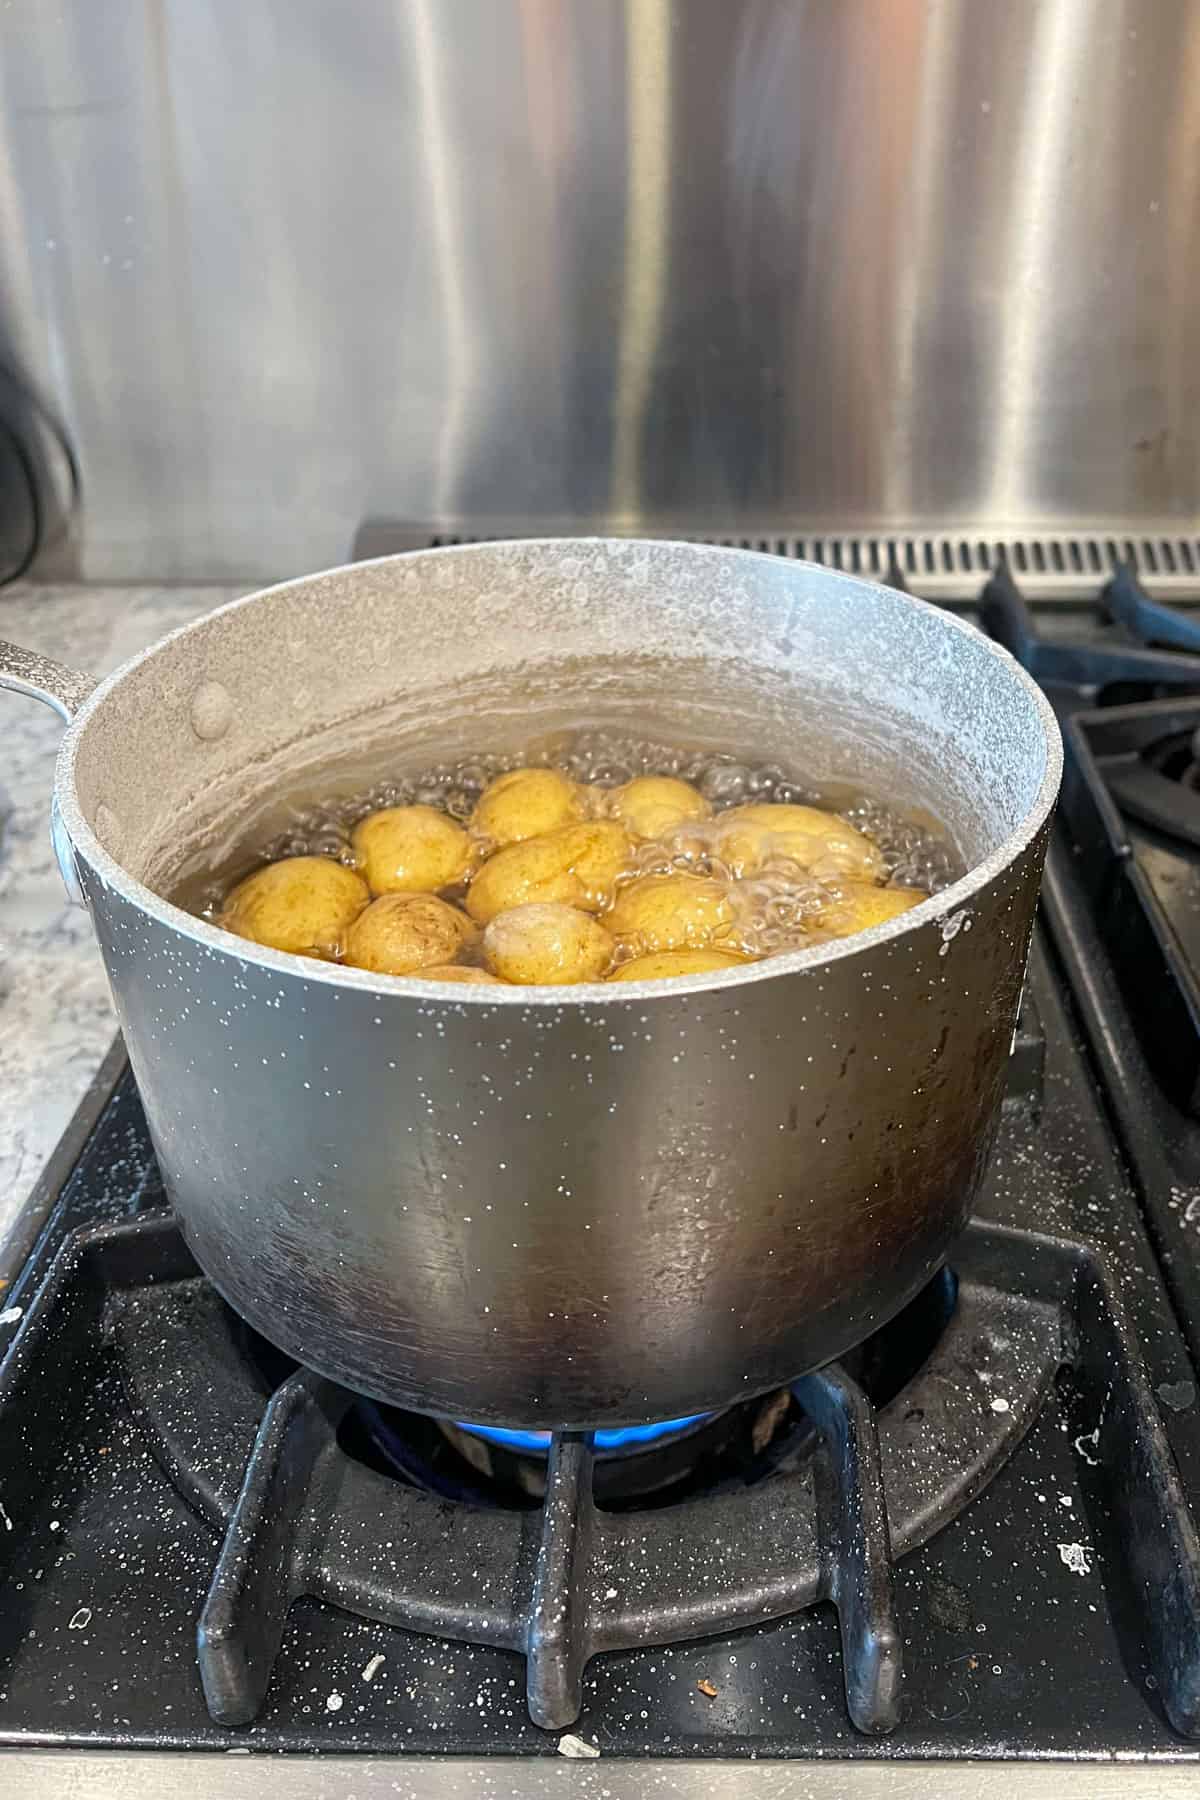 Pot filled with small new potatoes boiling in salt brine on the stovetop.